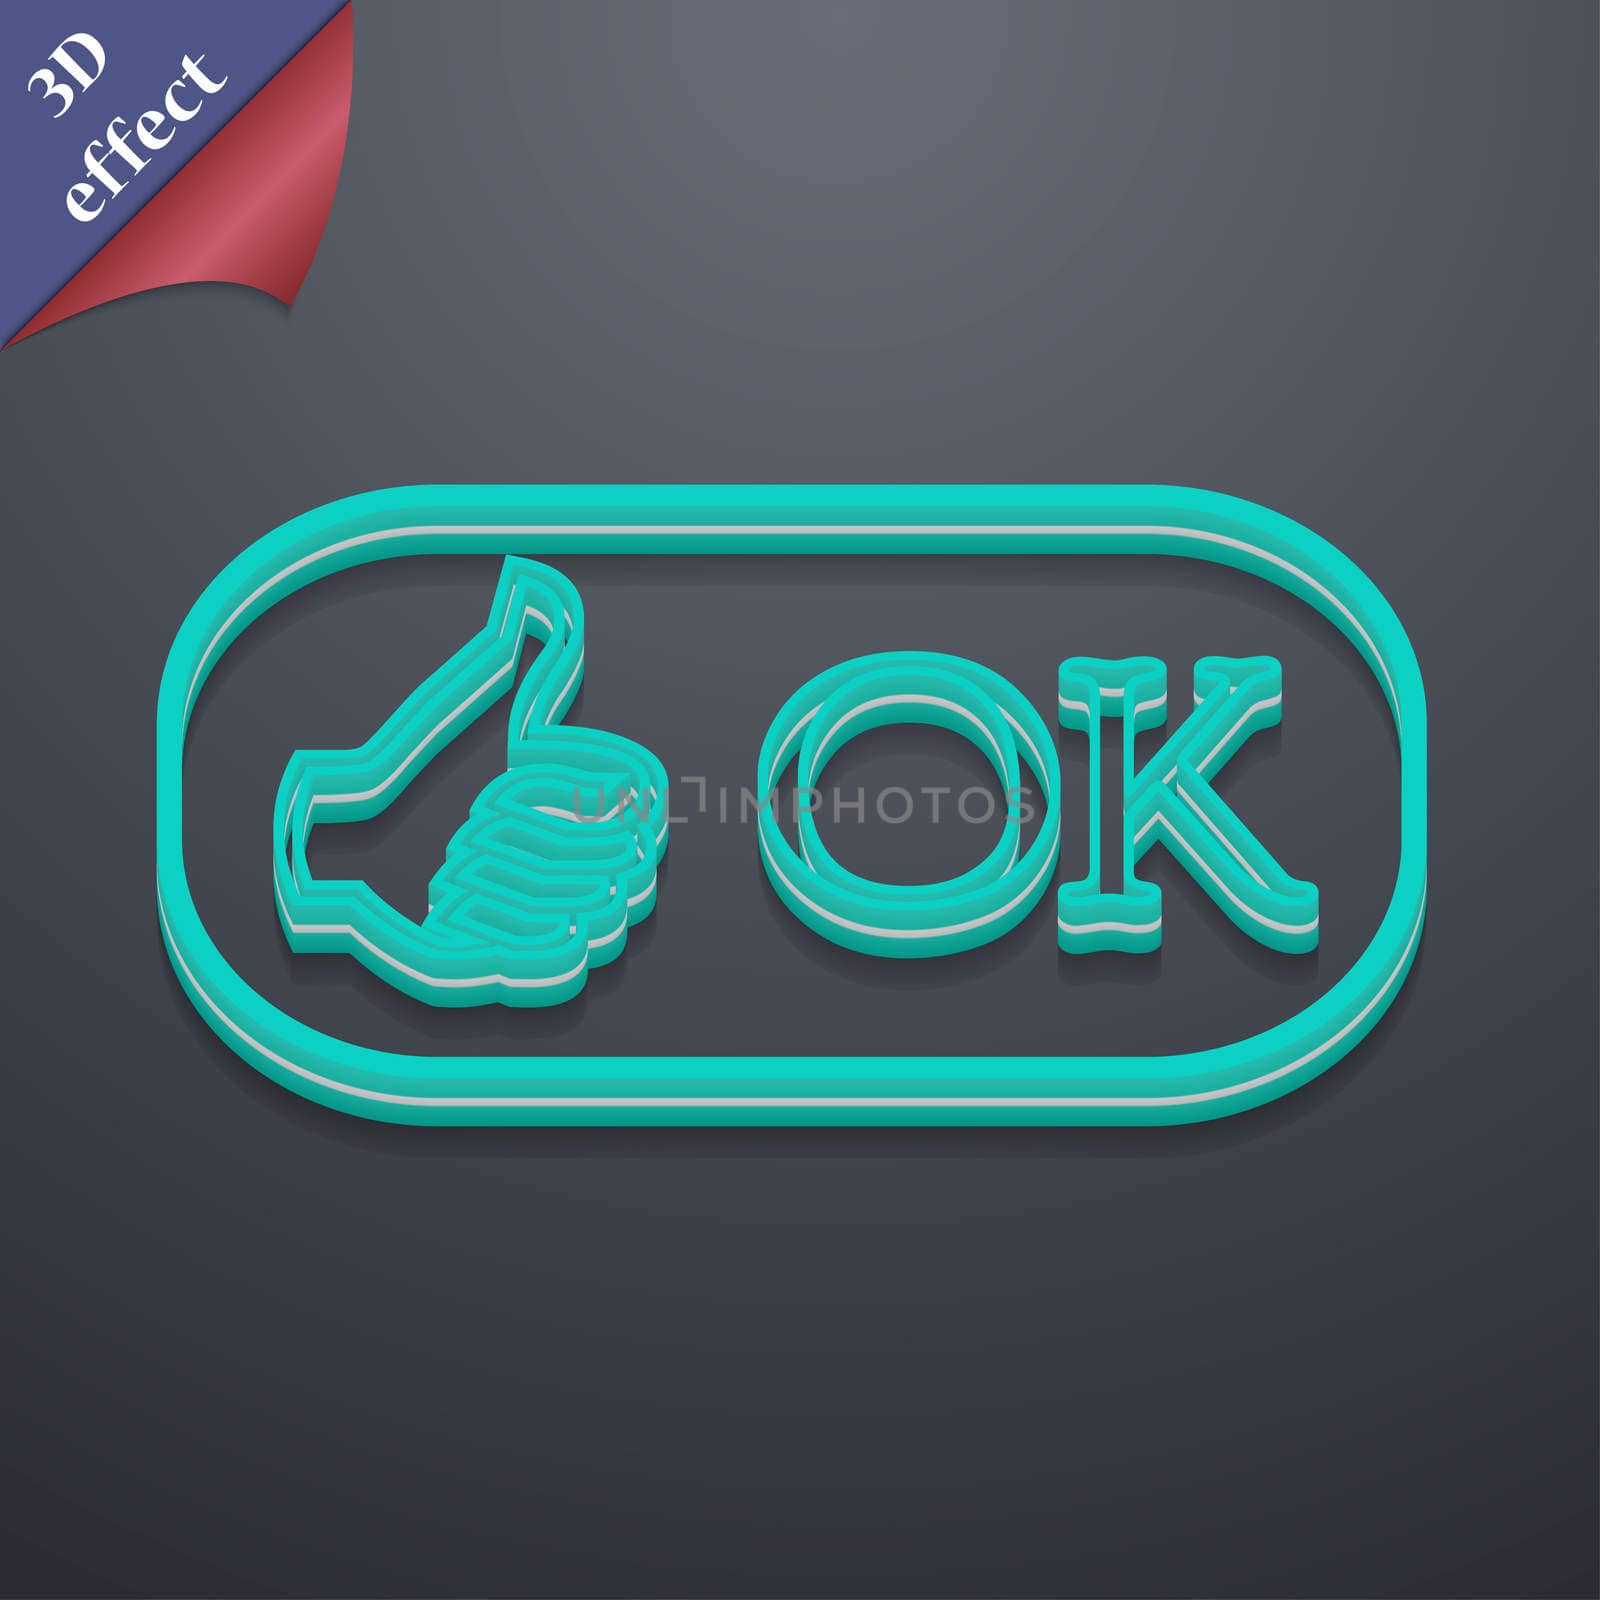 OK icon symbol. 3D style. Trendy, modern design with space for your text illustration. Rastrized copy